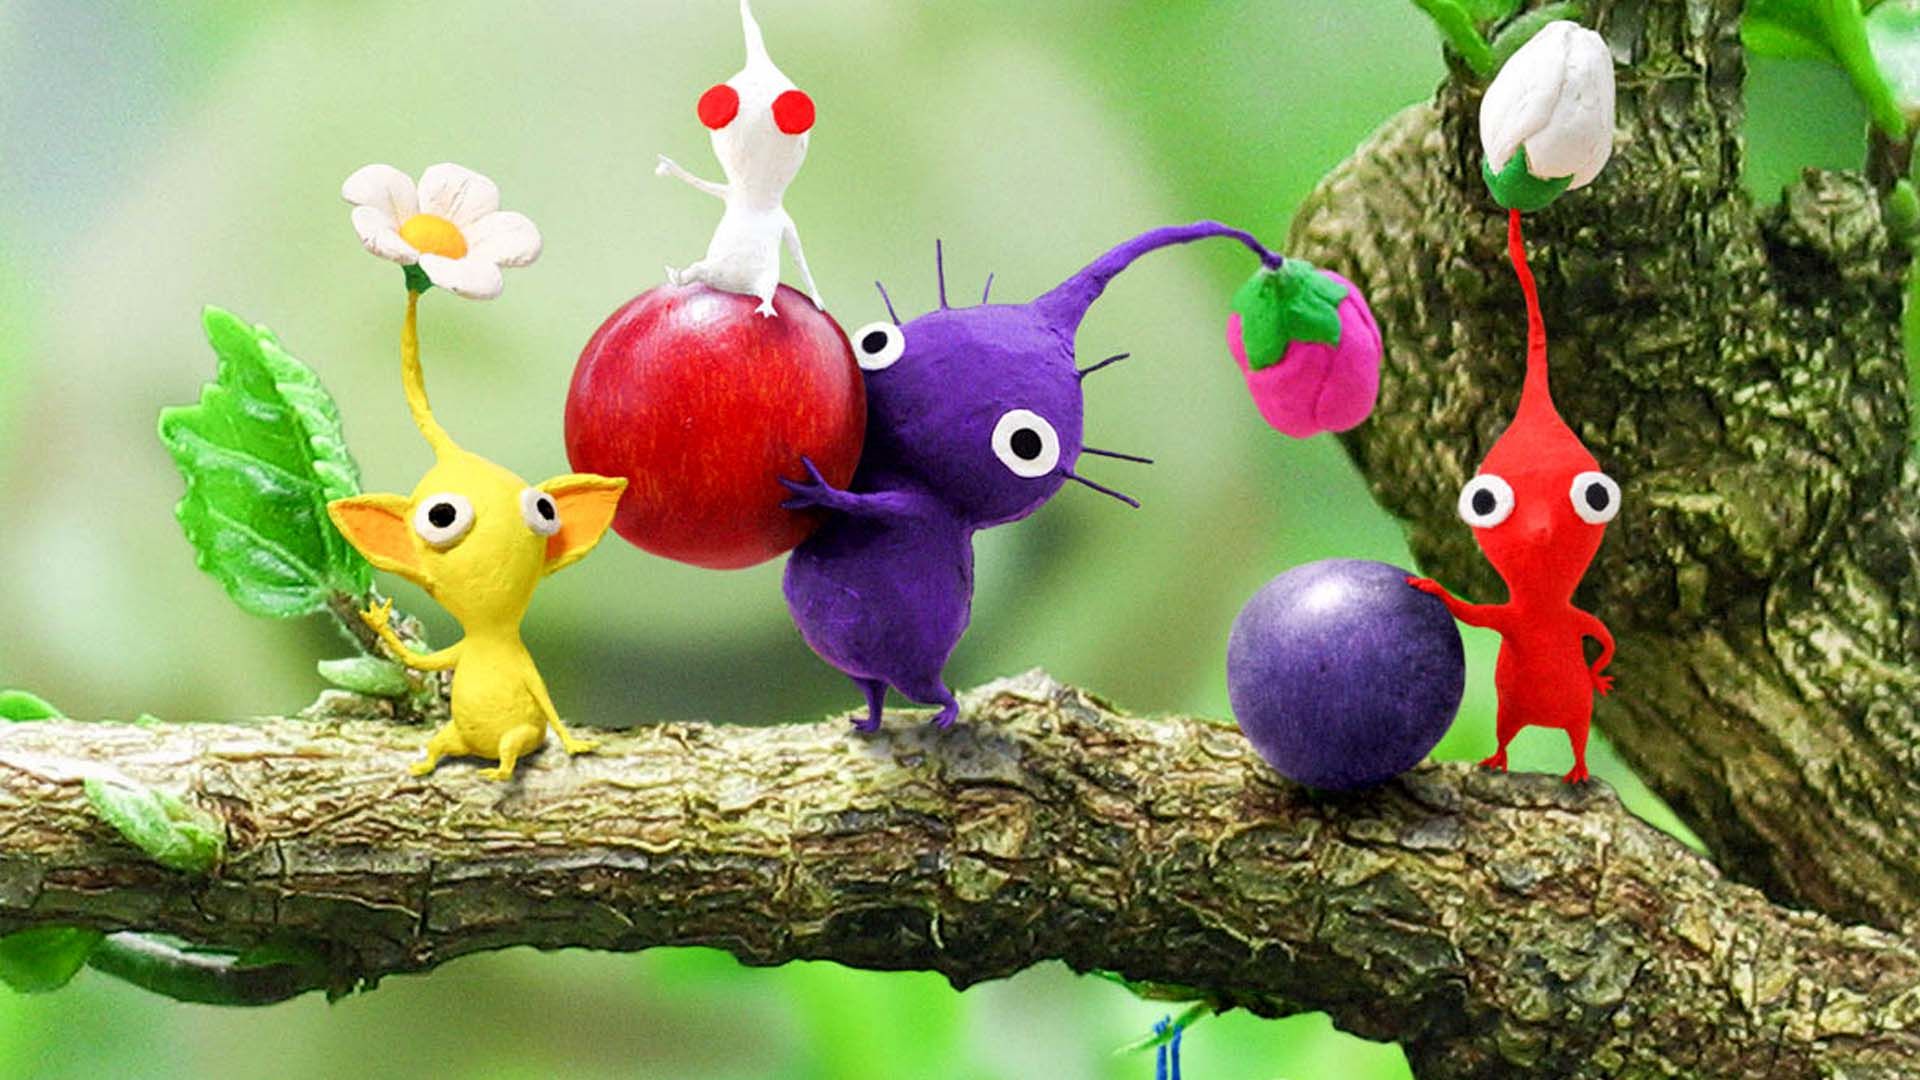 Official art for Pikmin 2